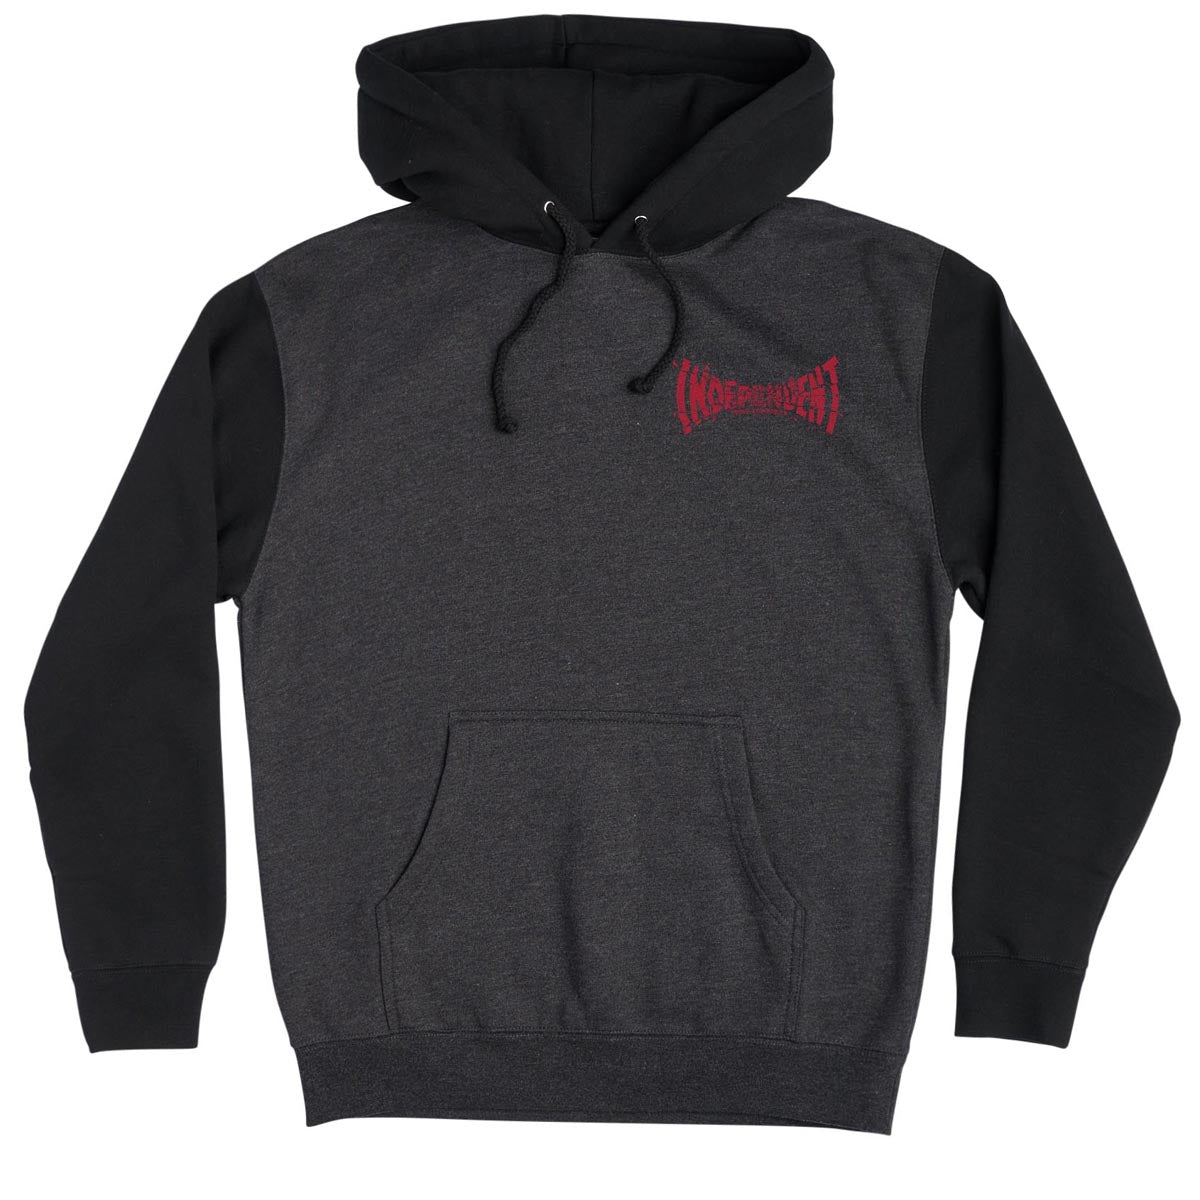 Independent Shatter Span Hoodie - Charcoal Heather/Black image 1